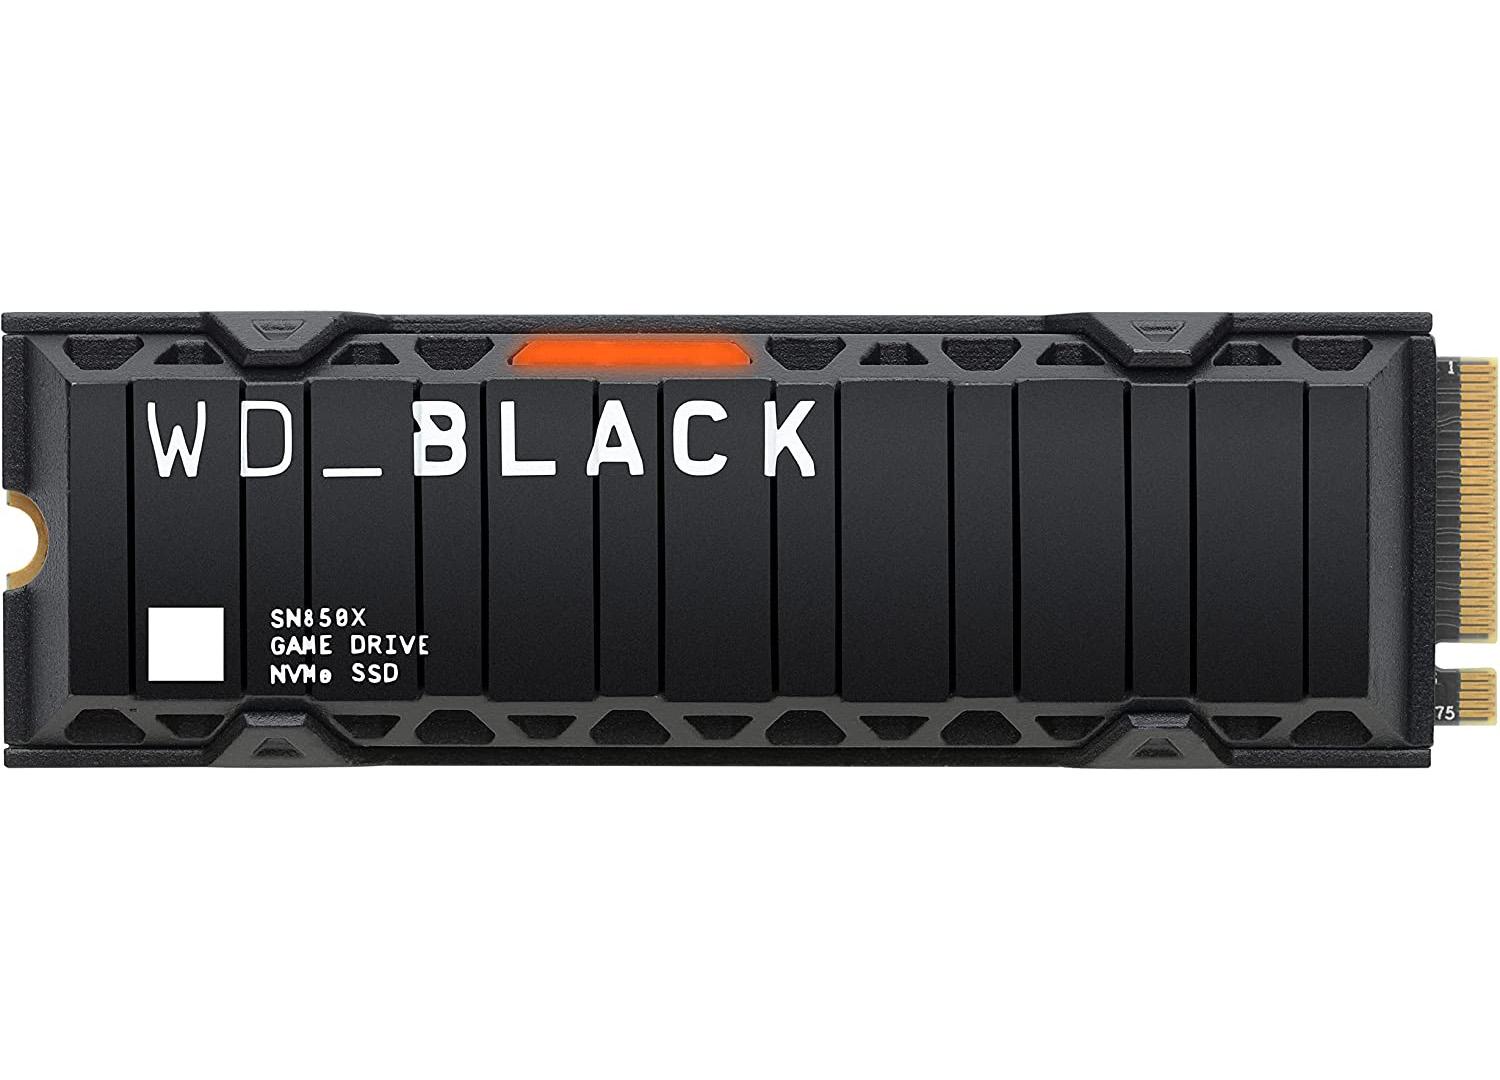 WD Black 2TB SN850x NVMe SSD Solid State Drive for $179.99 Shipped